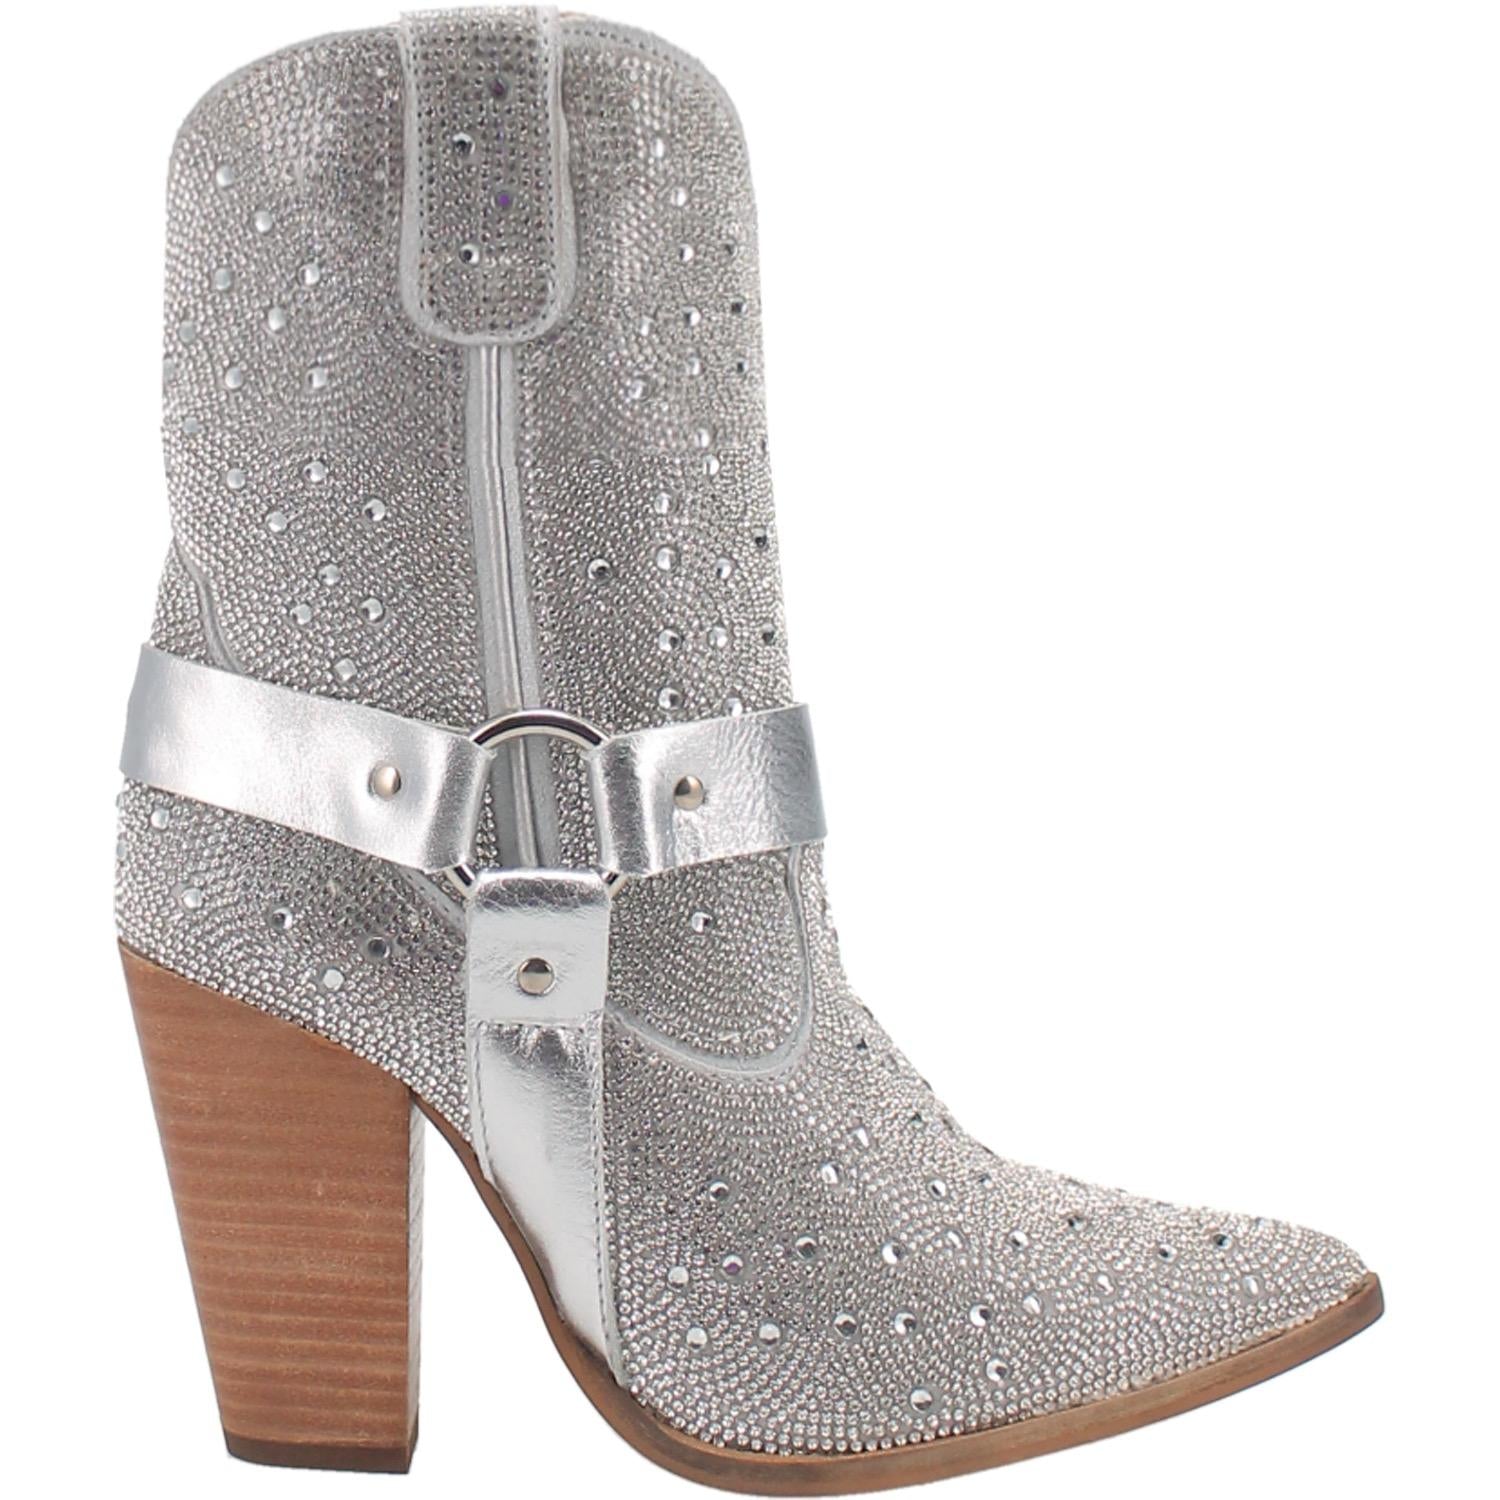 Crown Jewel Silver Rhinestone Leather Harness Booties (DS)